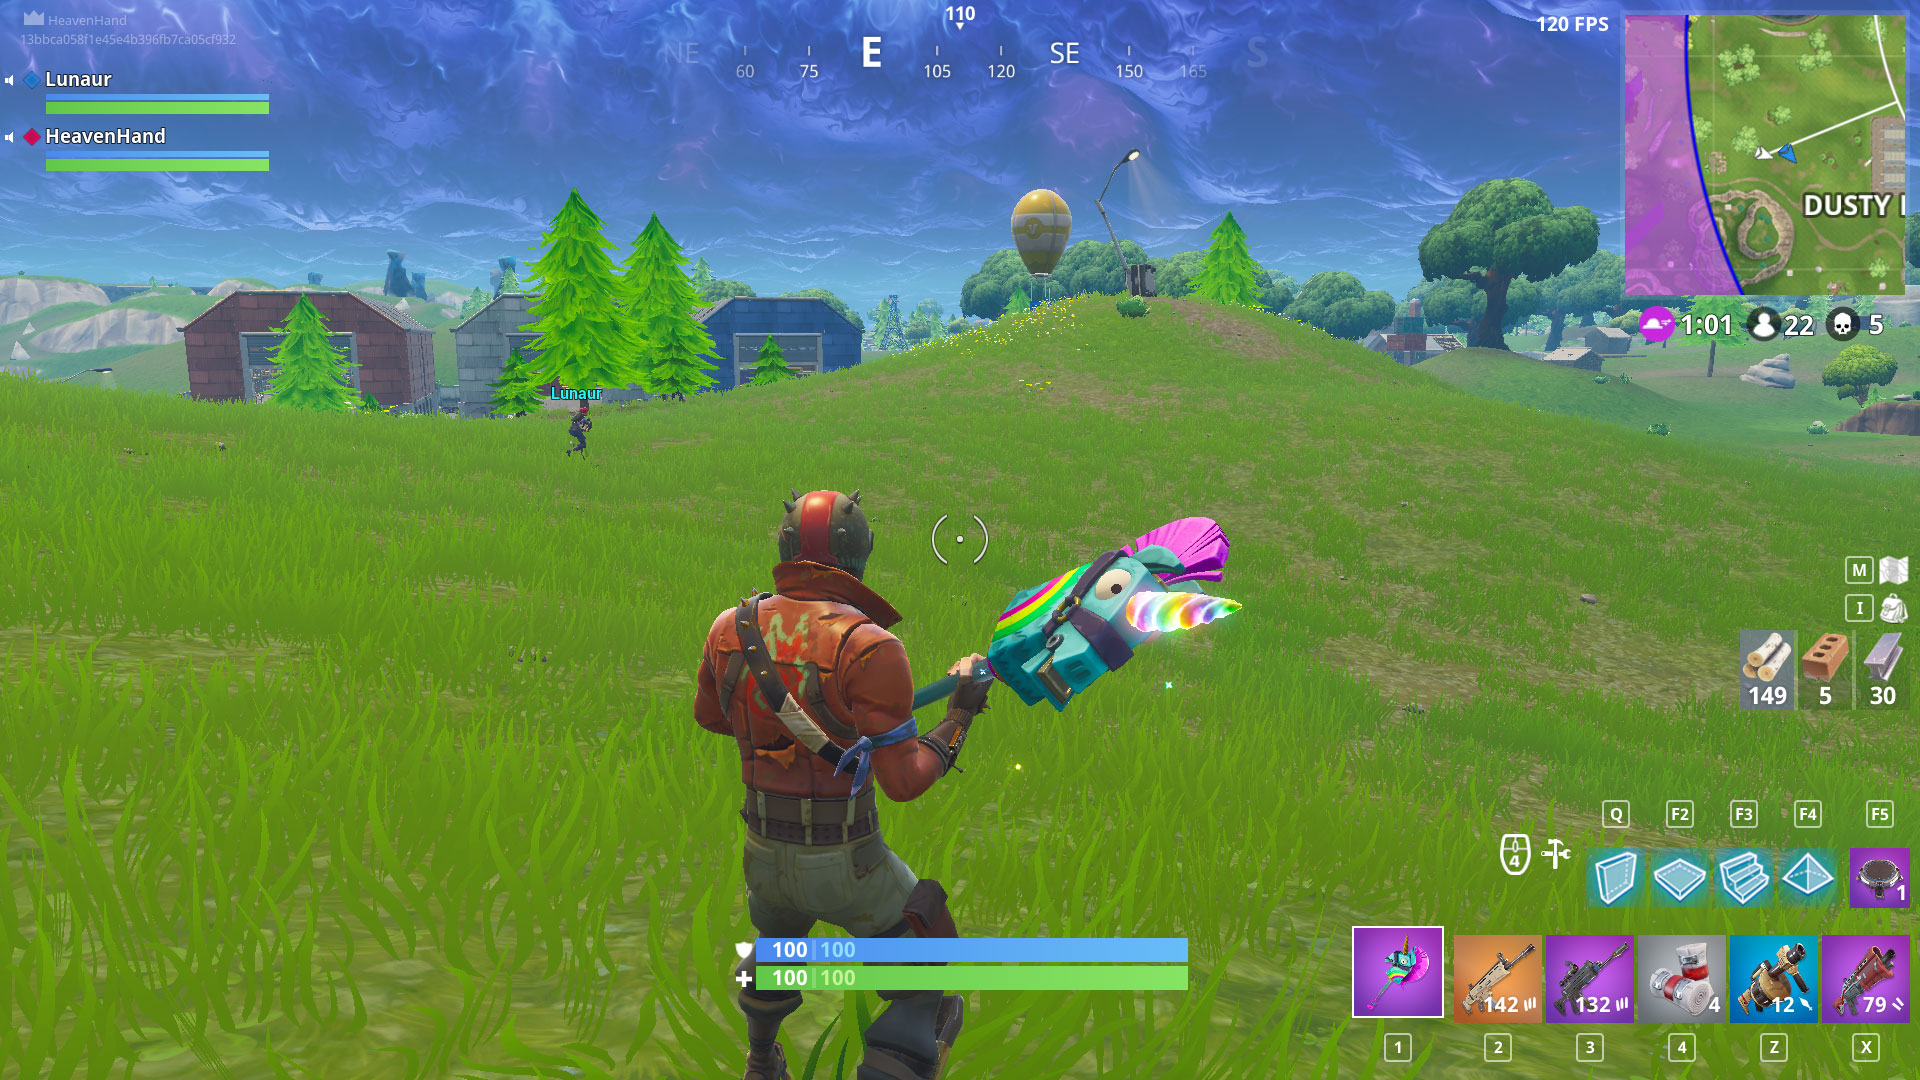 packaged in premium glossy fortnite themed packaging available at comic shops january 30 2019 - fortnite rainbow smash pickaxe replica